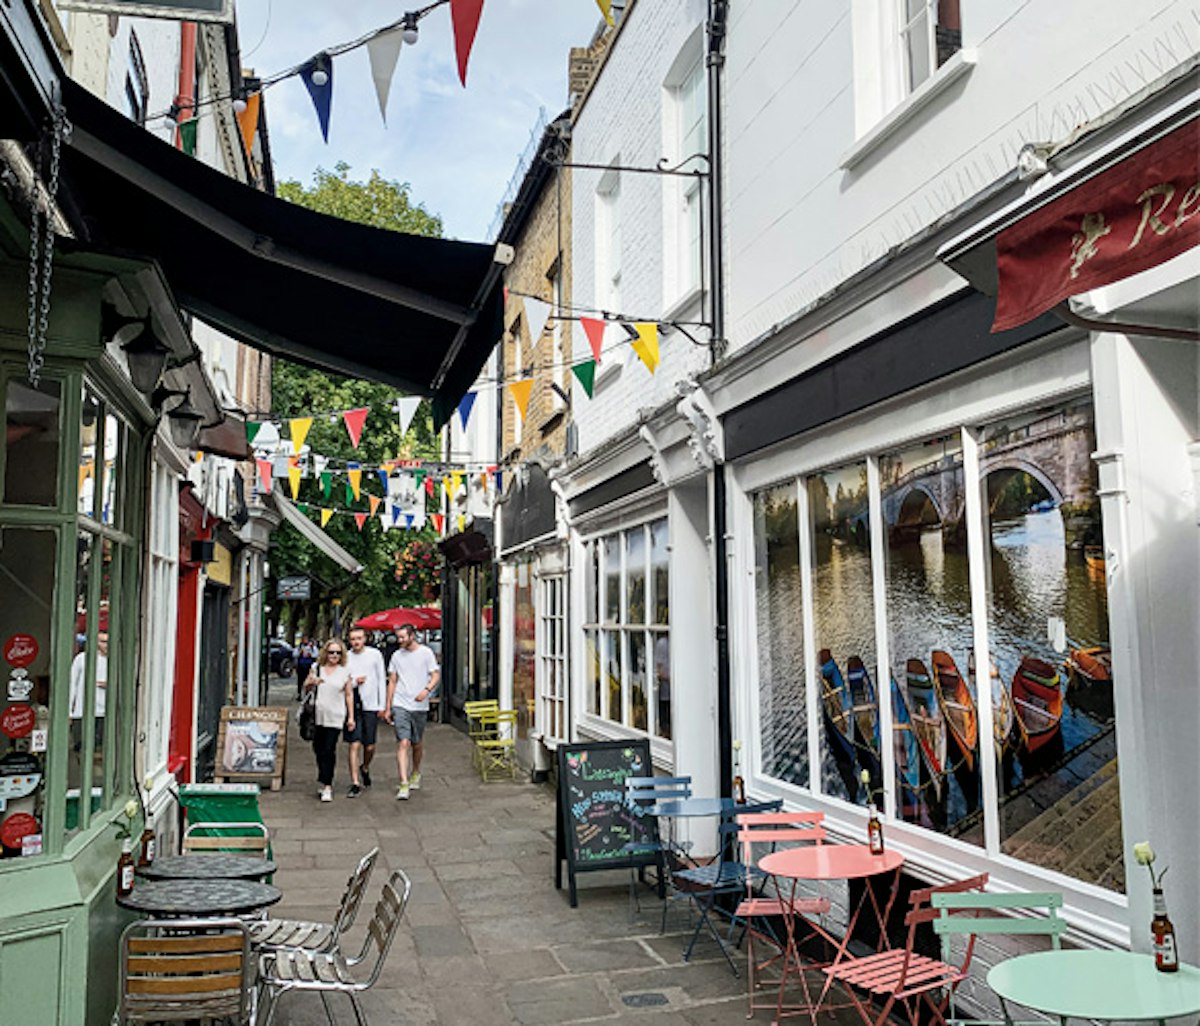 Quaint street with colorful bunting, outdoor seating, and canal boats visible in the background.